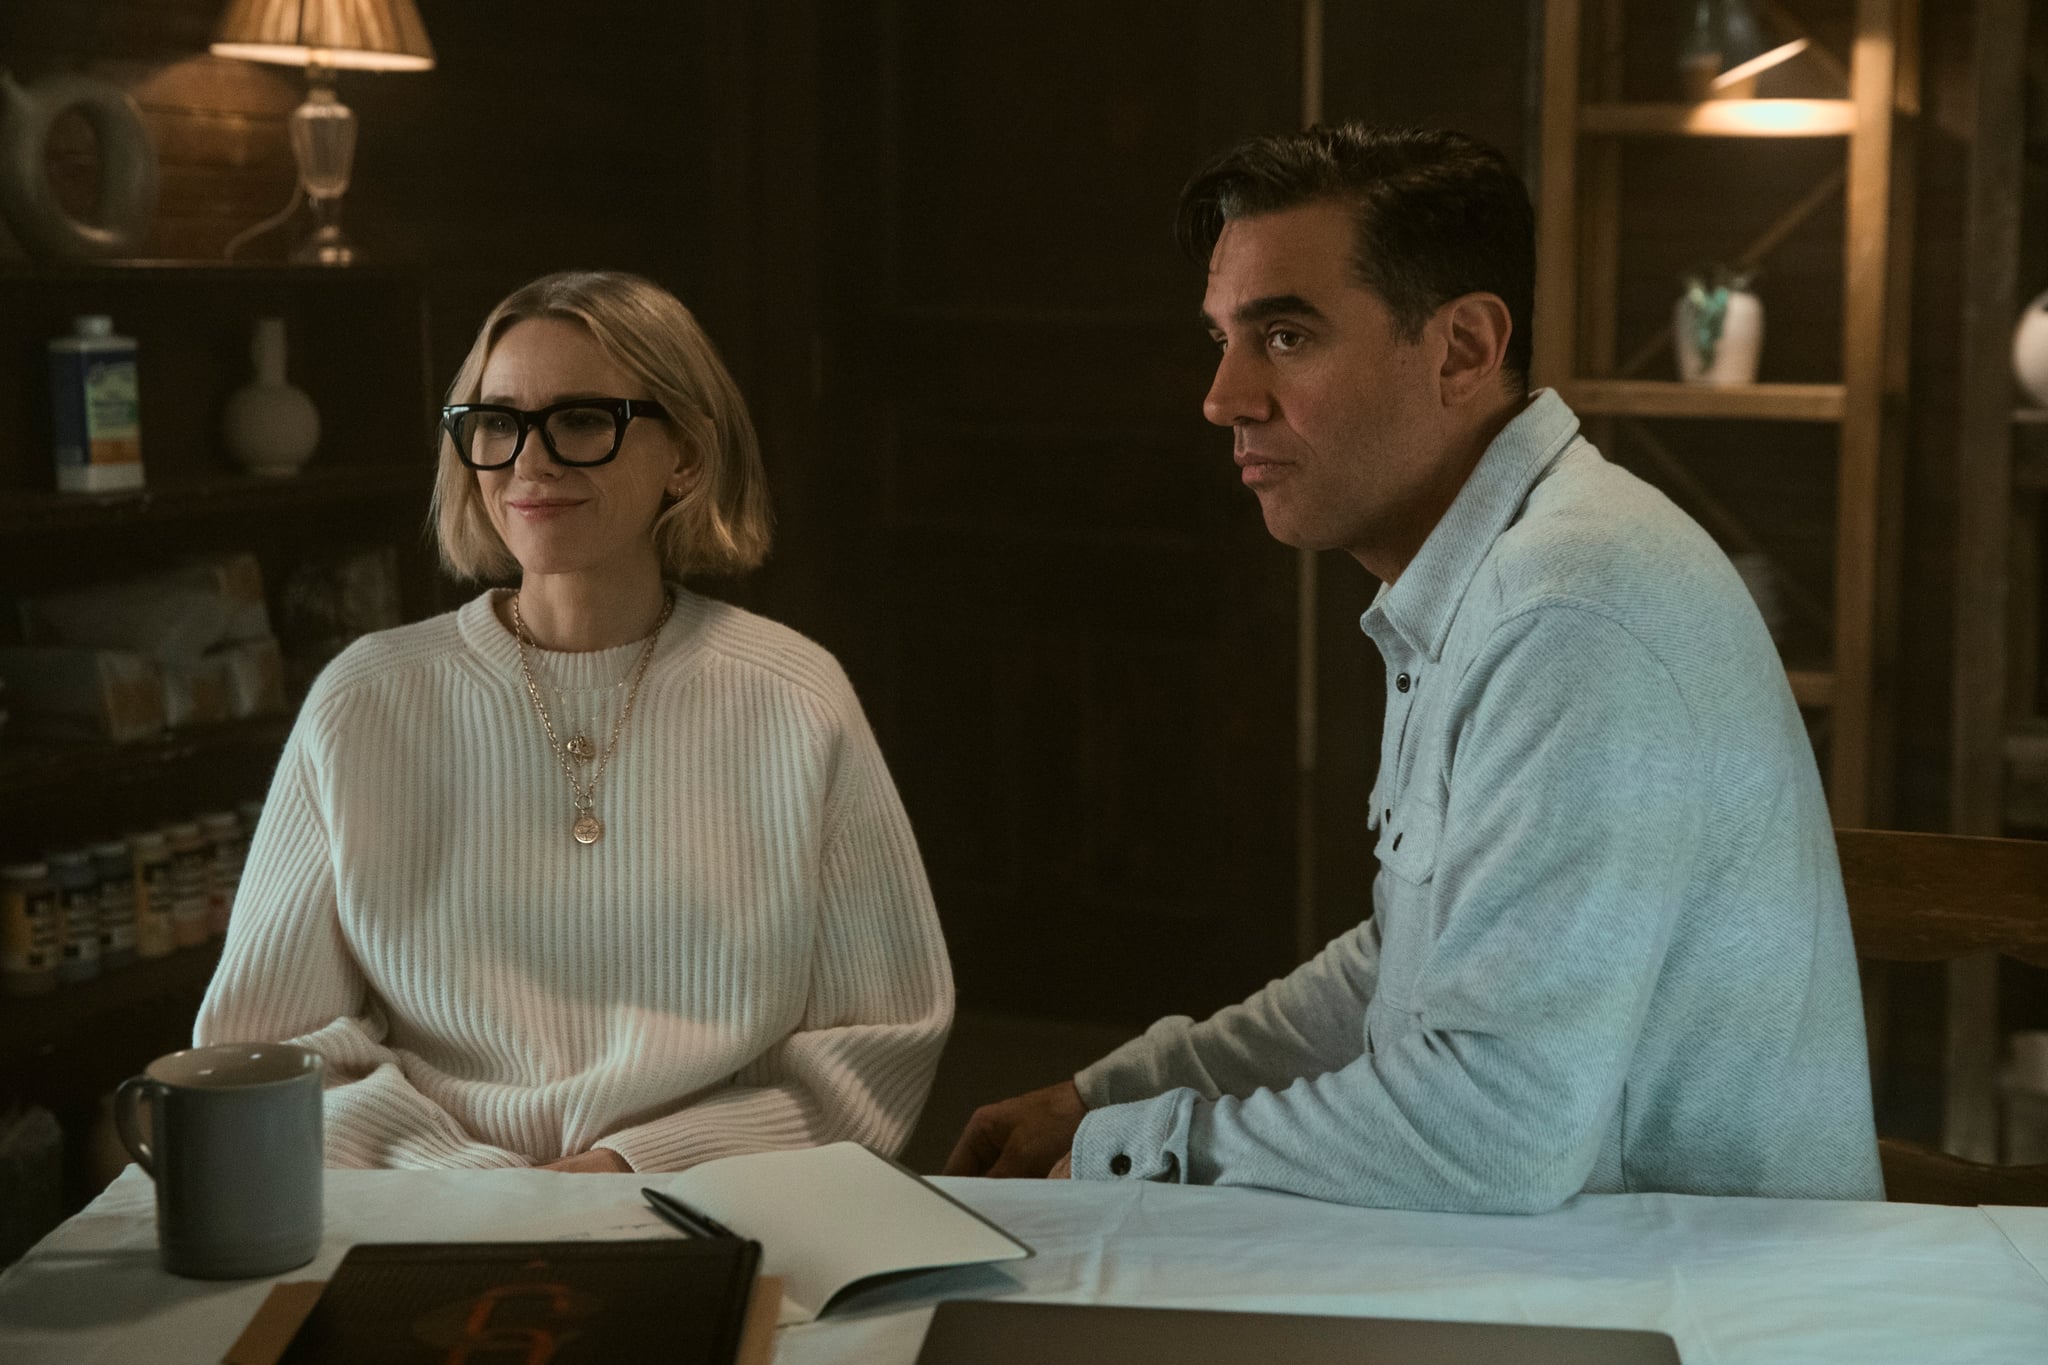 The Watcher. (L to R) Naomi Watts as Nora Brannock, Bobby Cannavale as Dean Brannock in episode 106 of The Watcher. Cr. Eric Liebowitz/Netflix © 2022